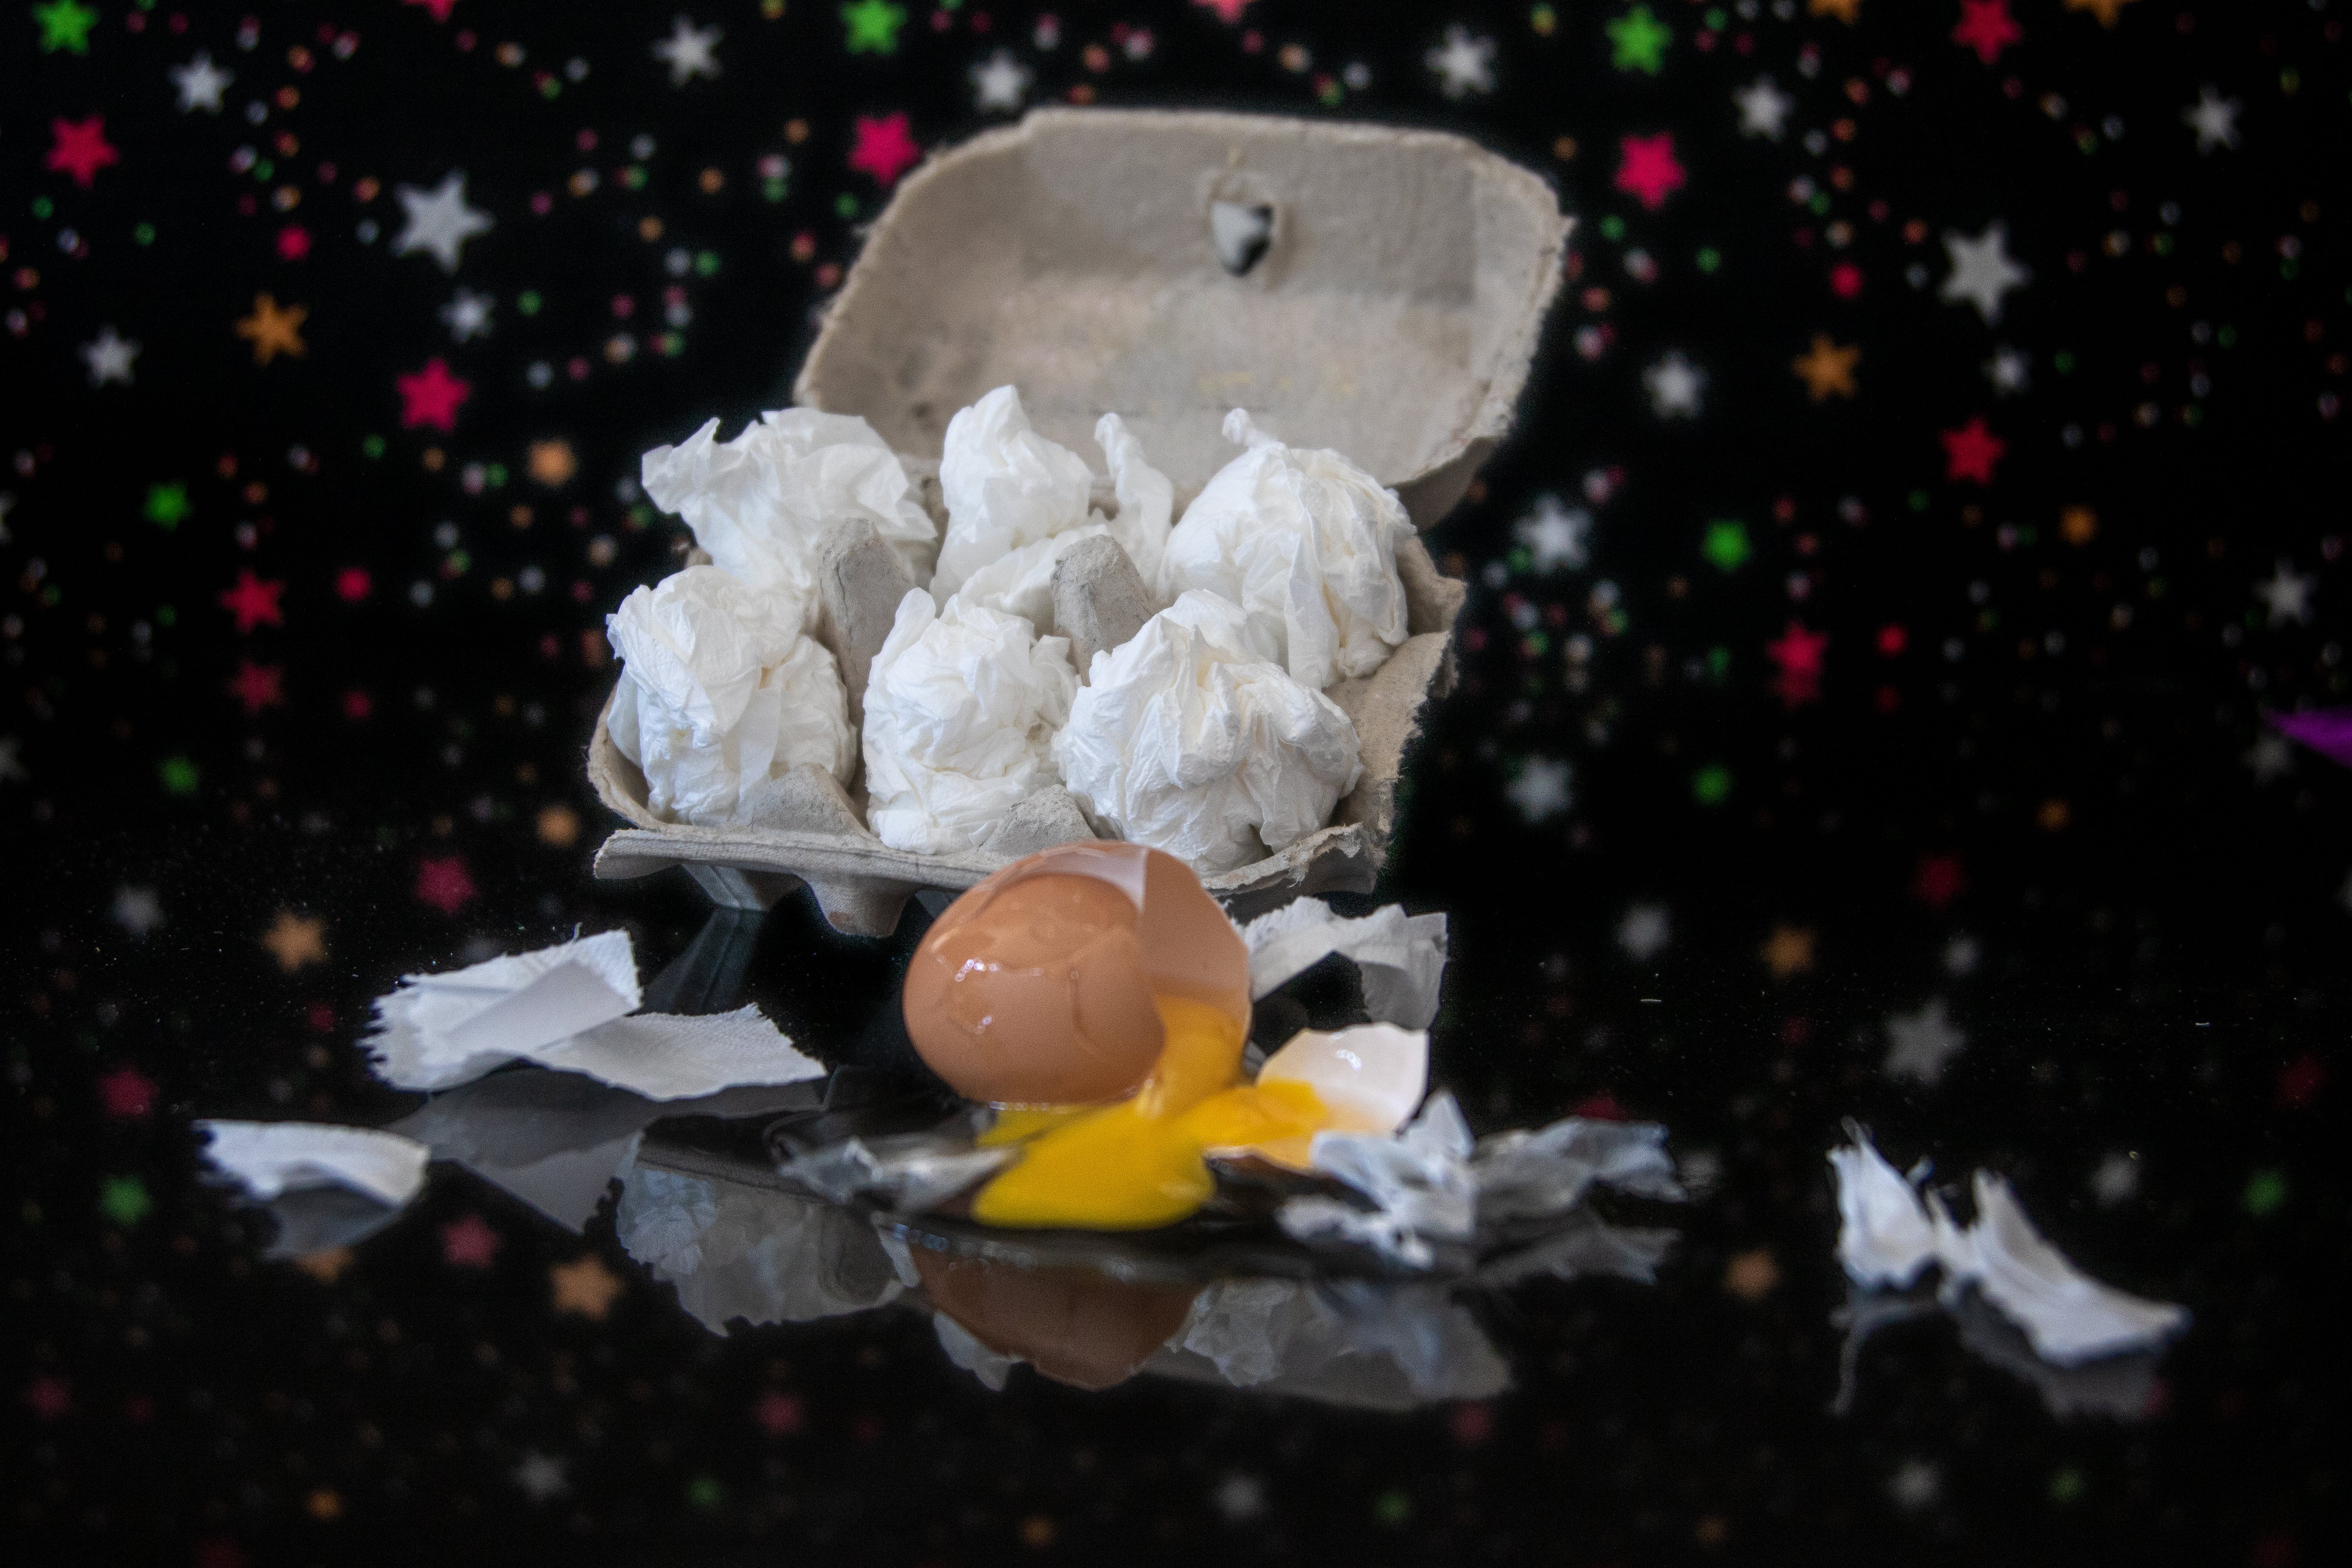 egg carton with cracked egg against a black background